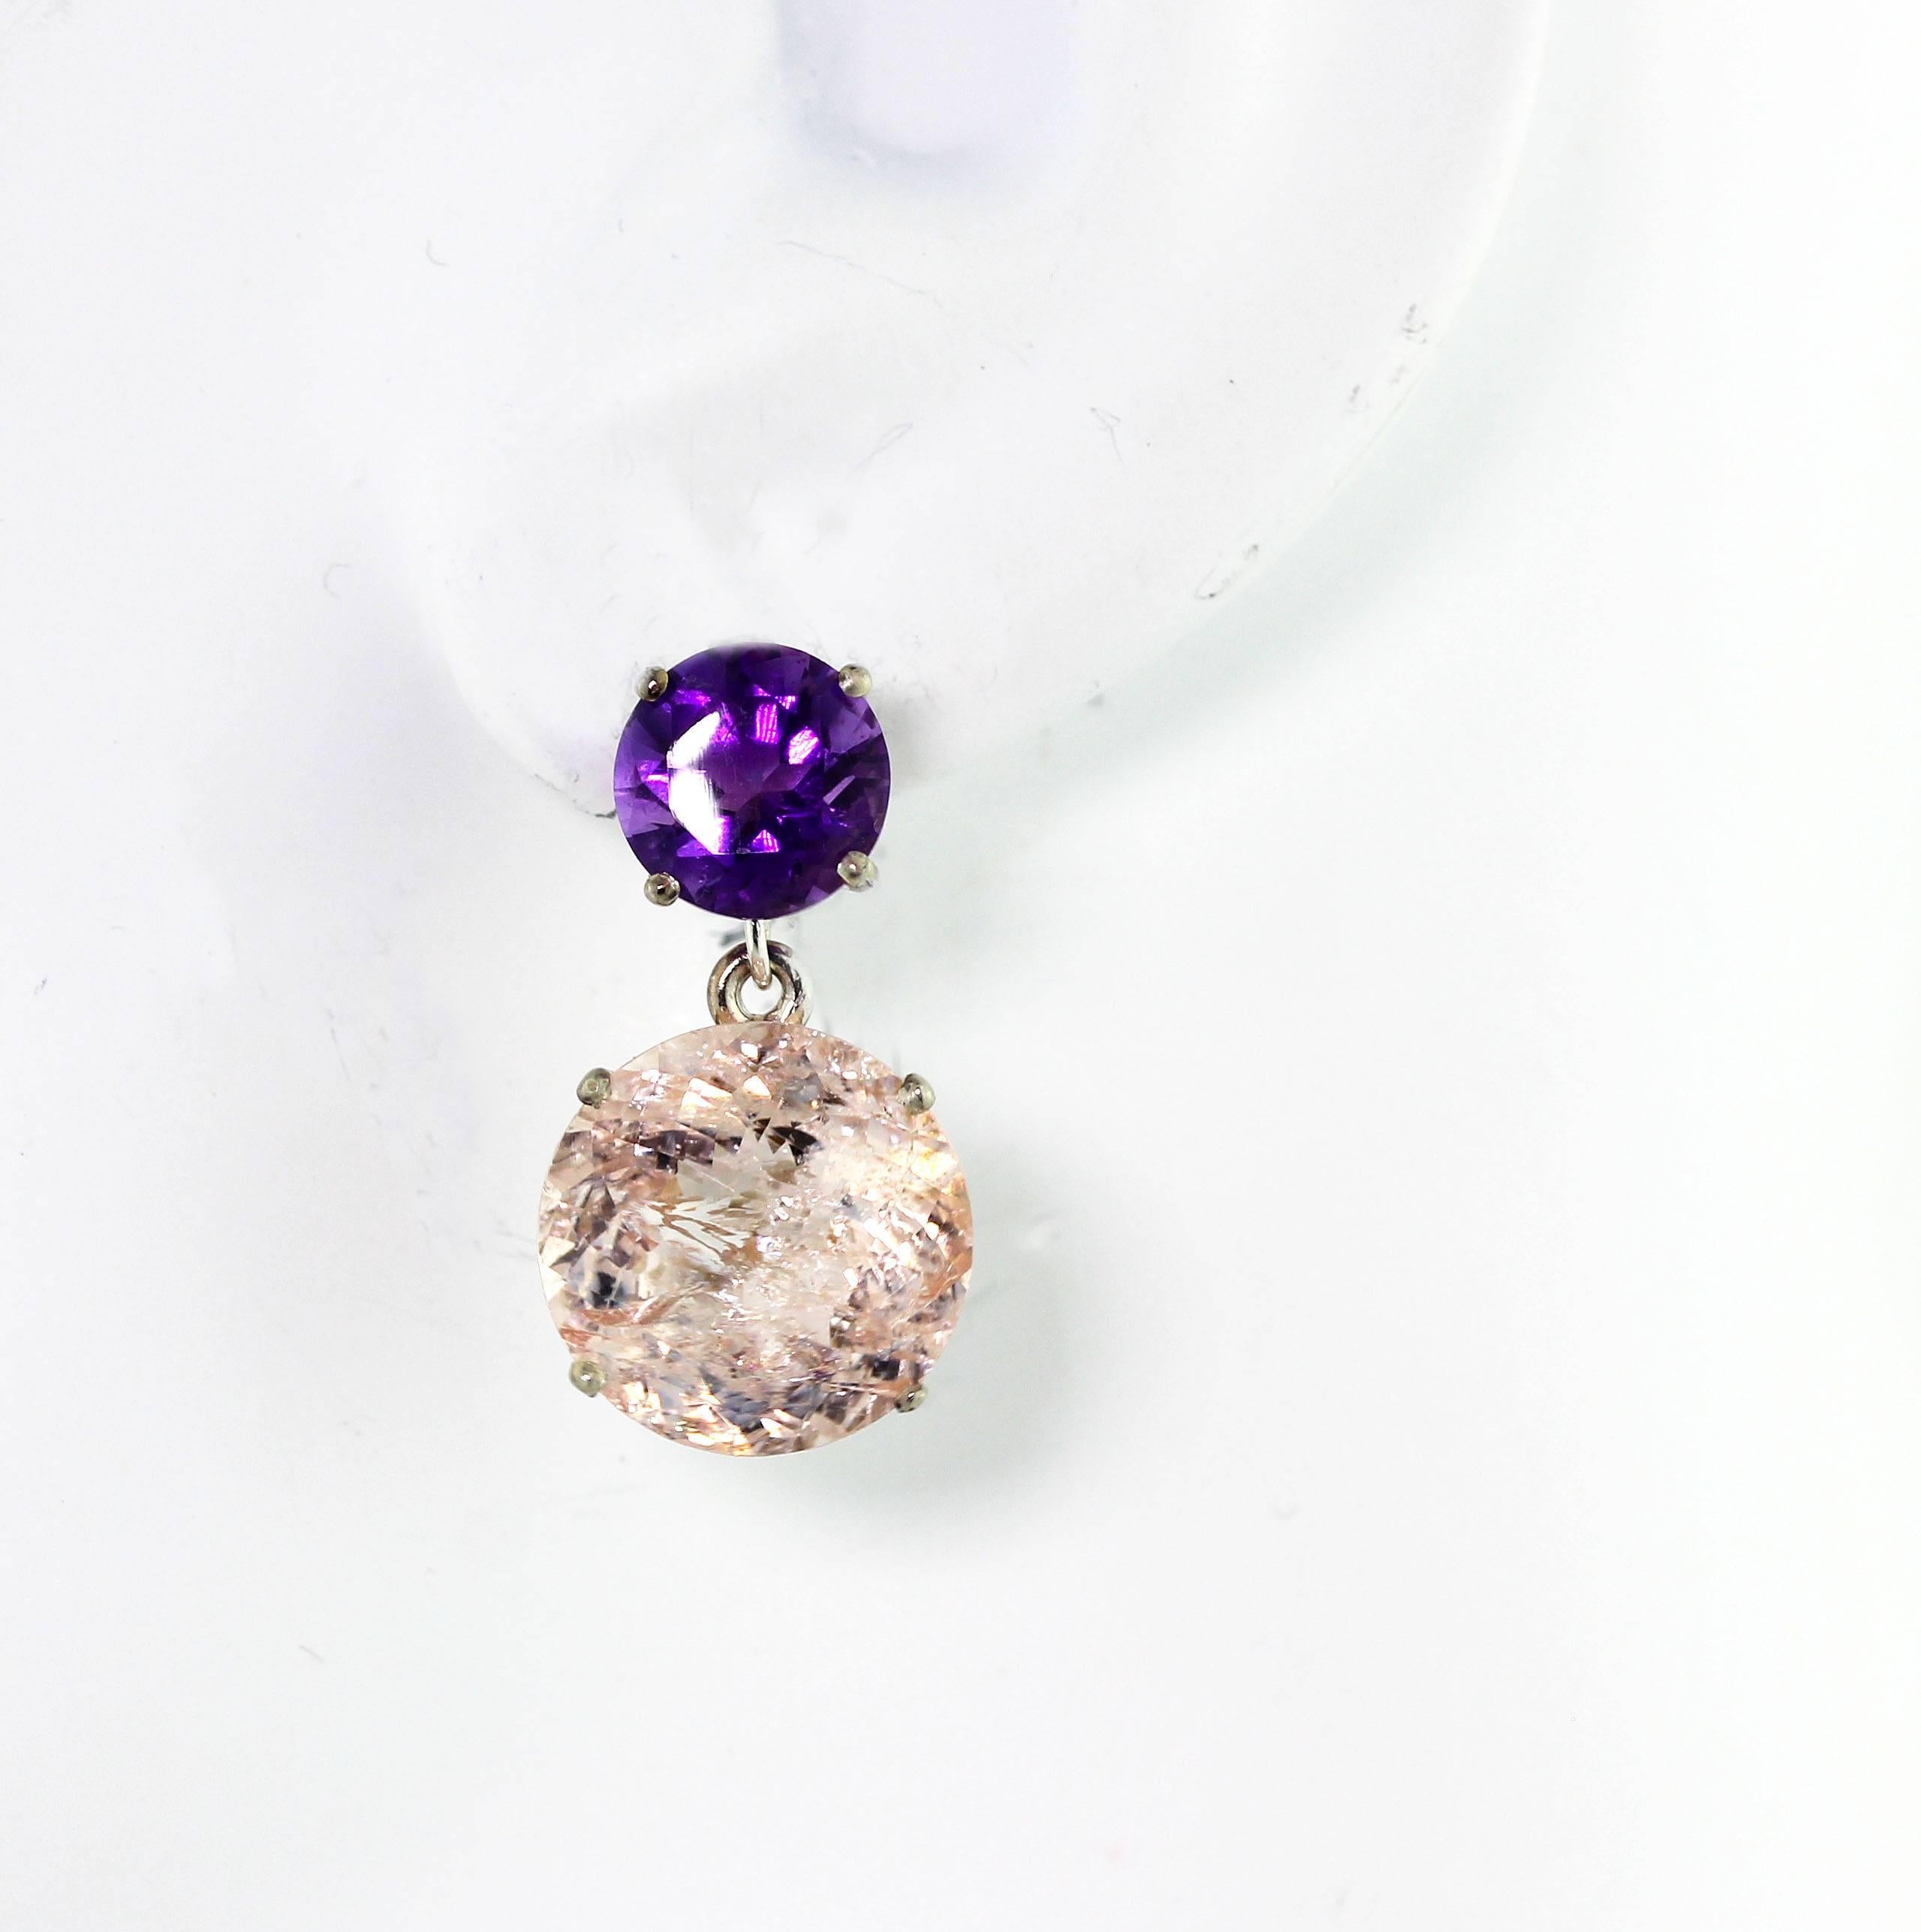 16.58 carats of rare beautiful light sparkling pink checkerboard gemcut round pink Morganites (13 mm) dangle elegantly from these glittering round purple Amethysts (7 mm) set in Sterling Silver stud earrings.  They measure .91 inches from top of